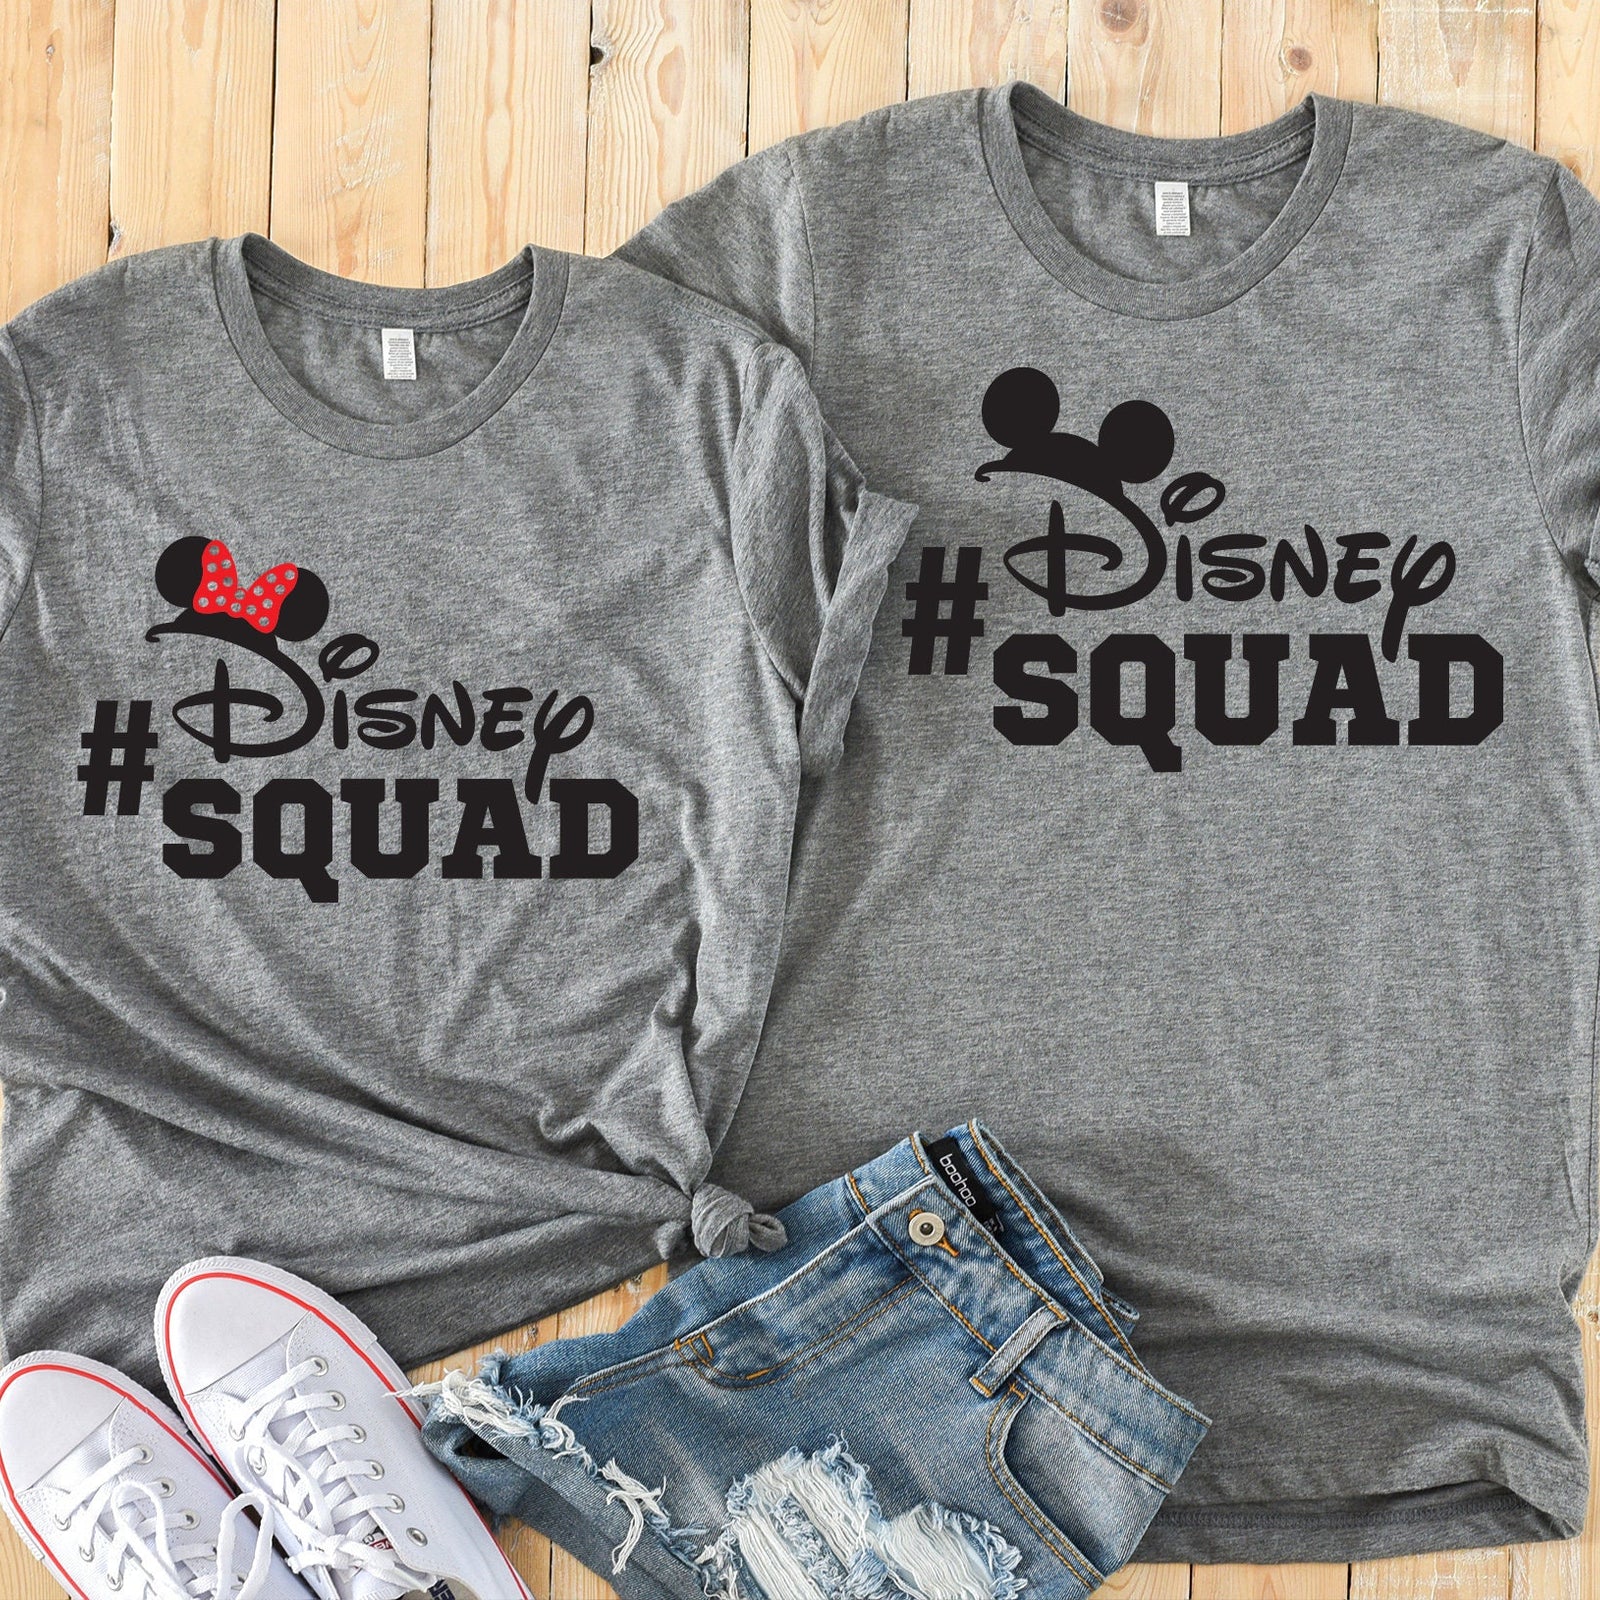 Disney Squad Mickey and Minnie Matching Shirts - Disney Couples - Family Group T shirts